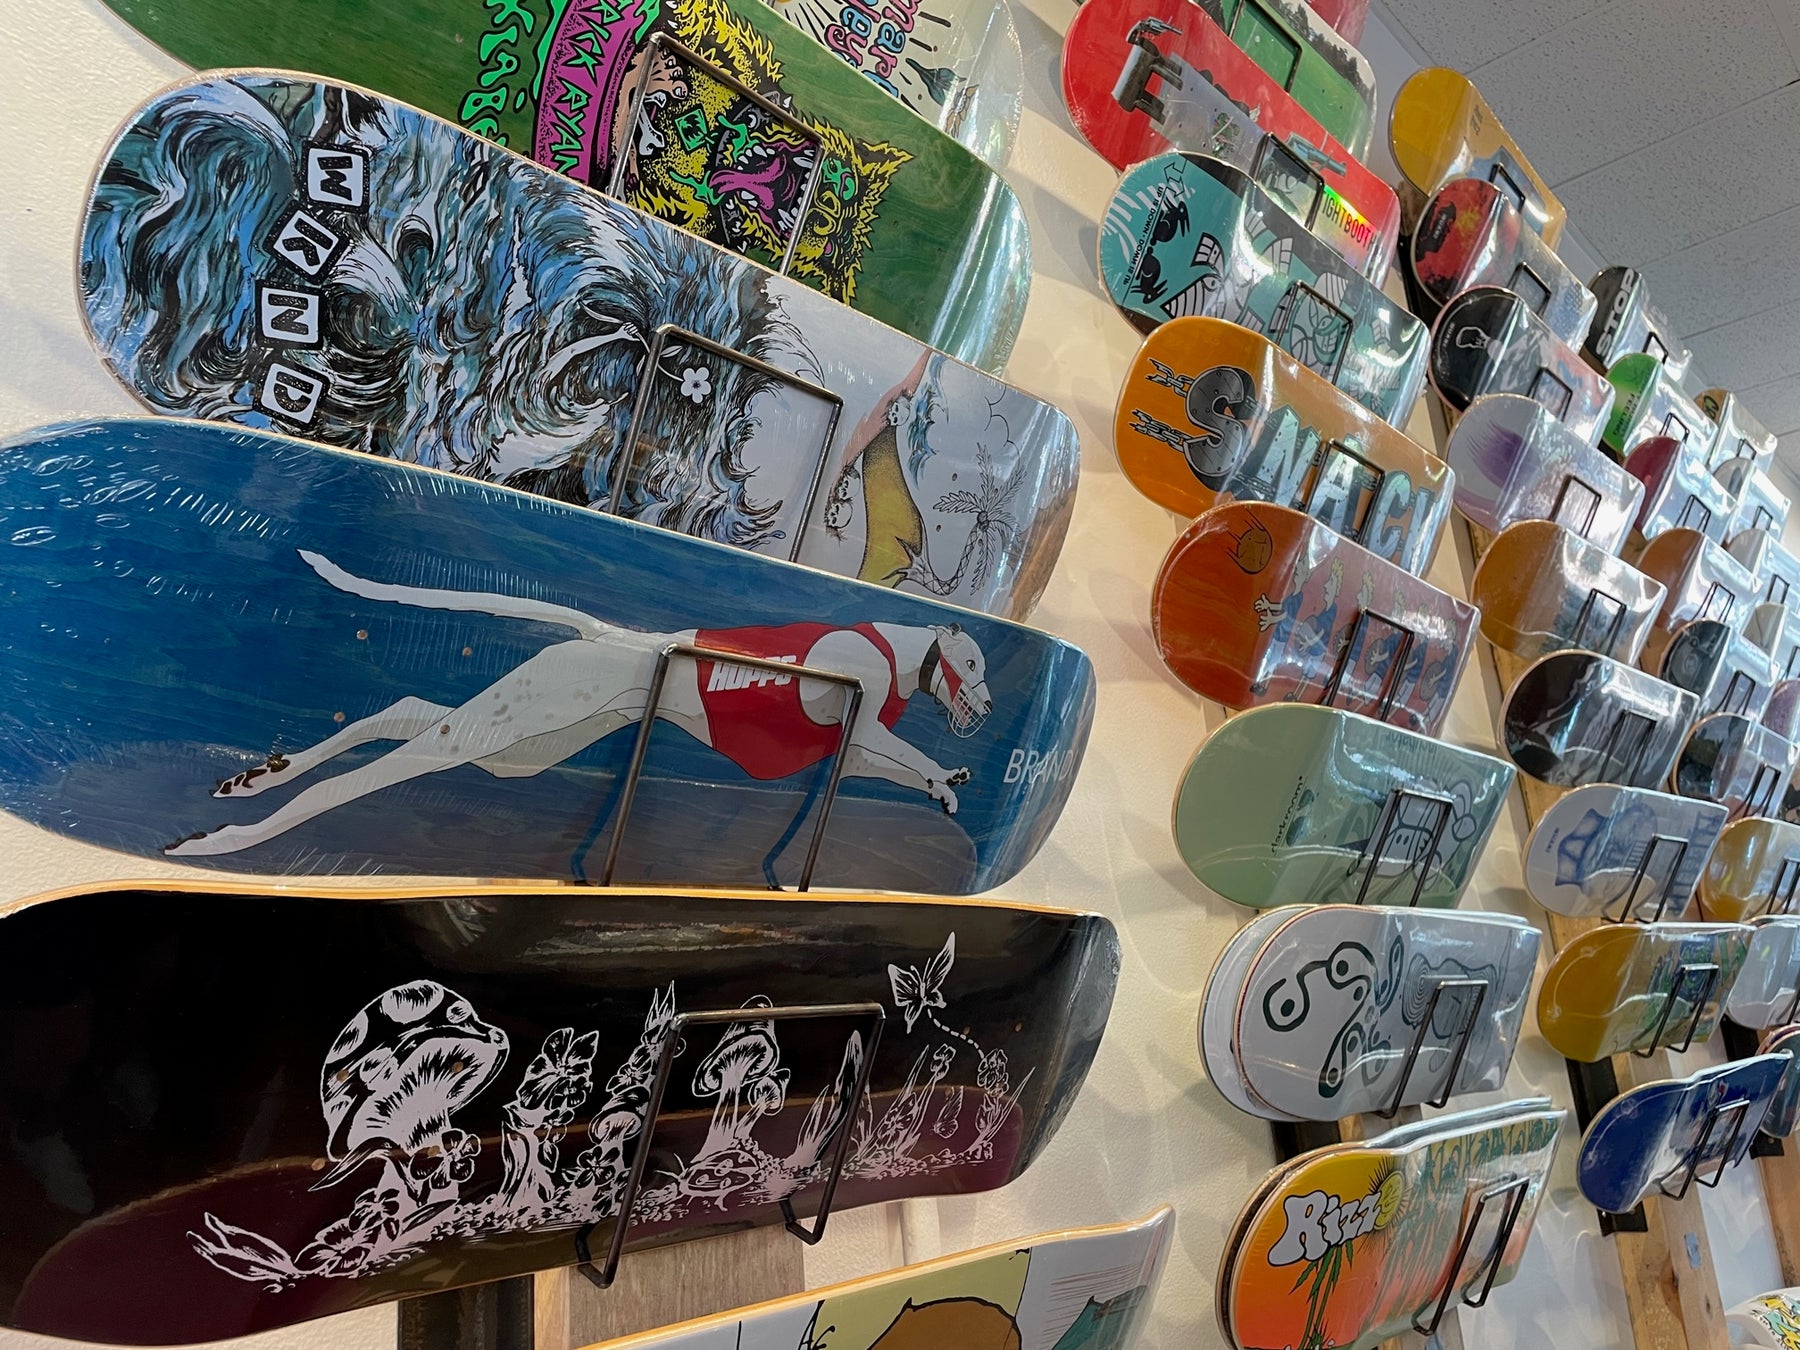 We have a large variety of skate decks available online, but even more in store. Visit our shop in Charlottesville, Virginia for more!